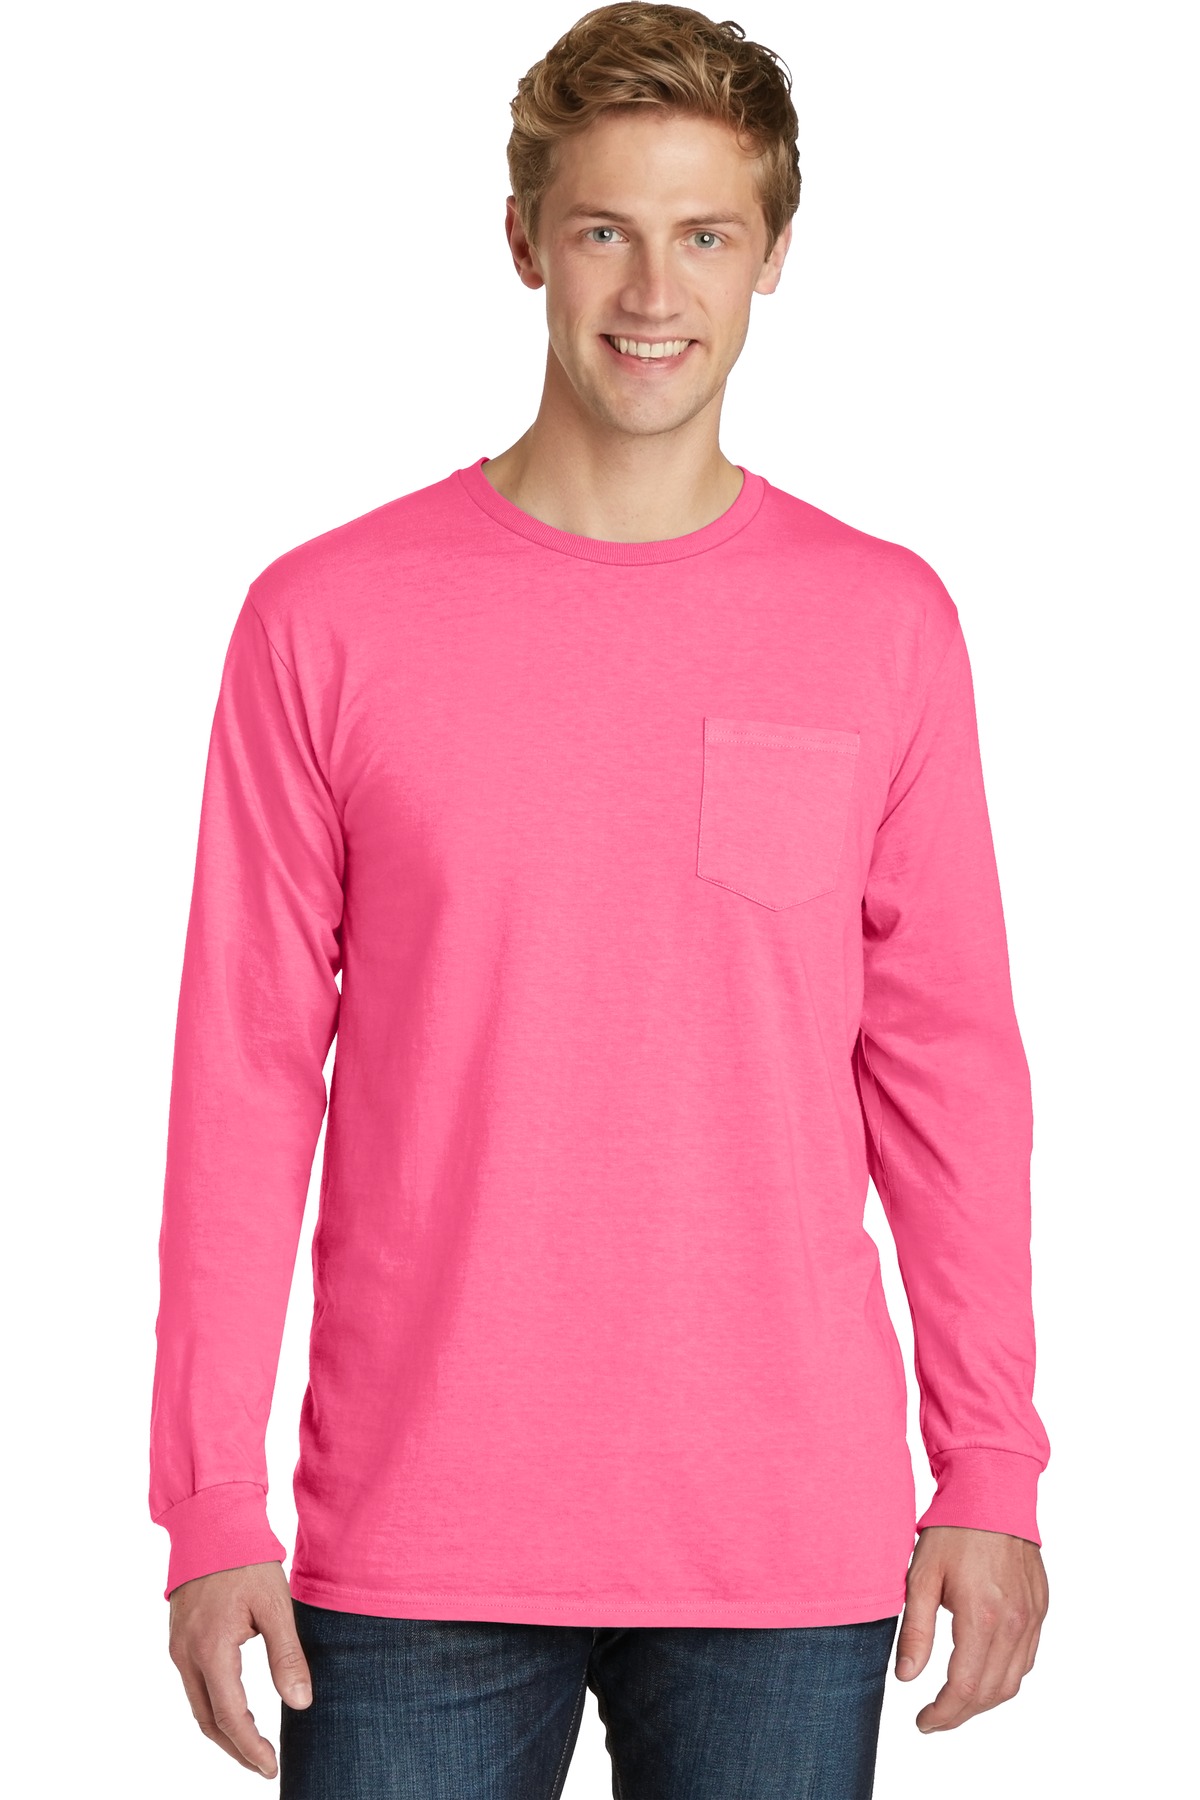 click to view Neon Pink